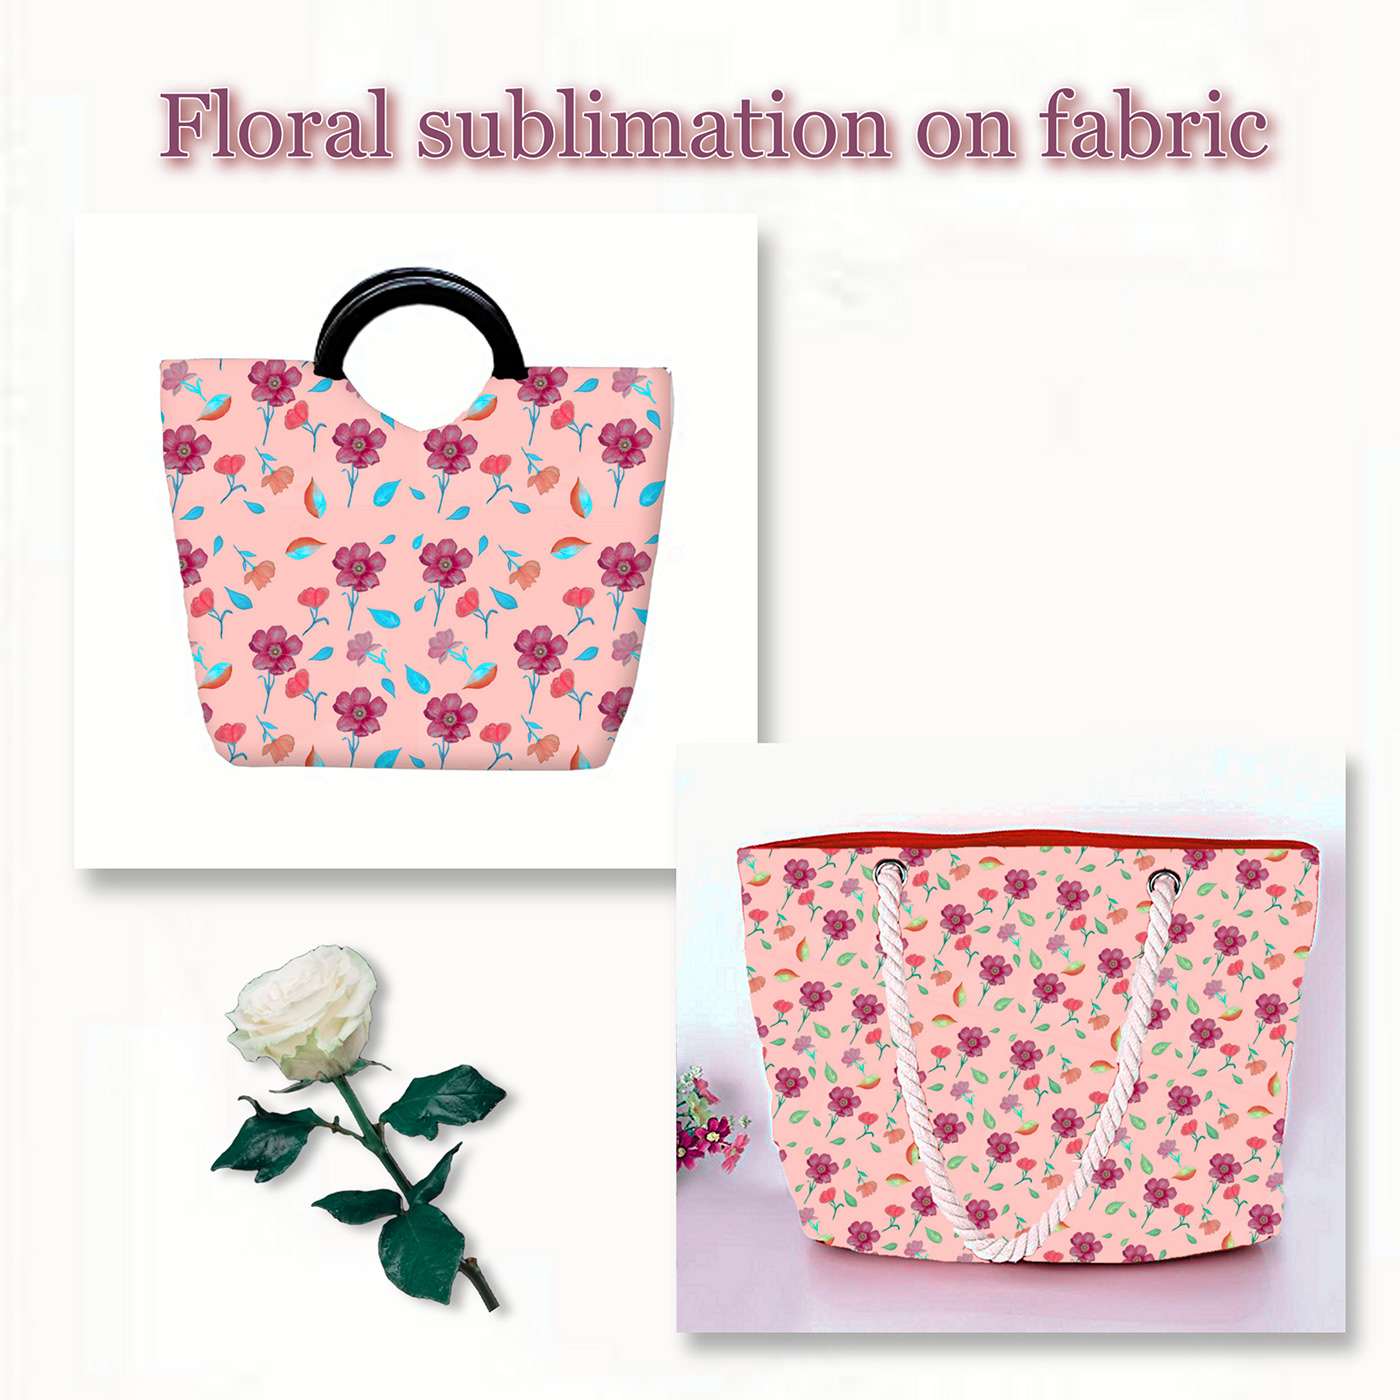 Floral sublimation on fabric